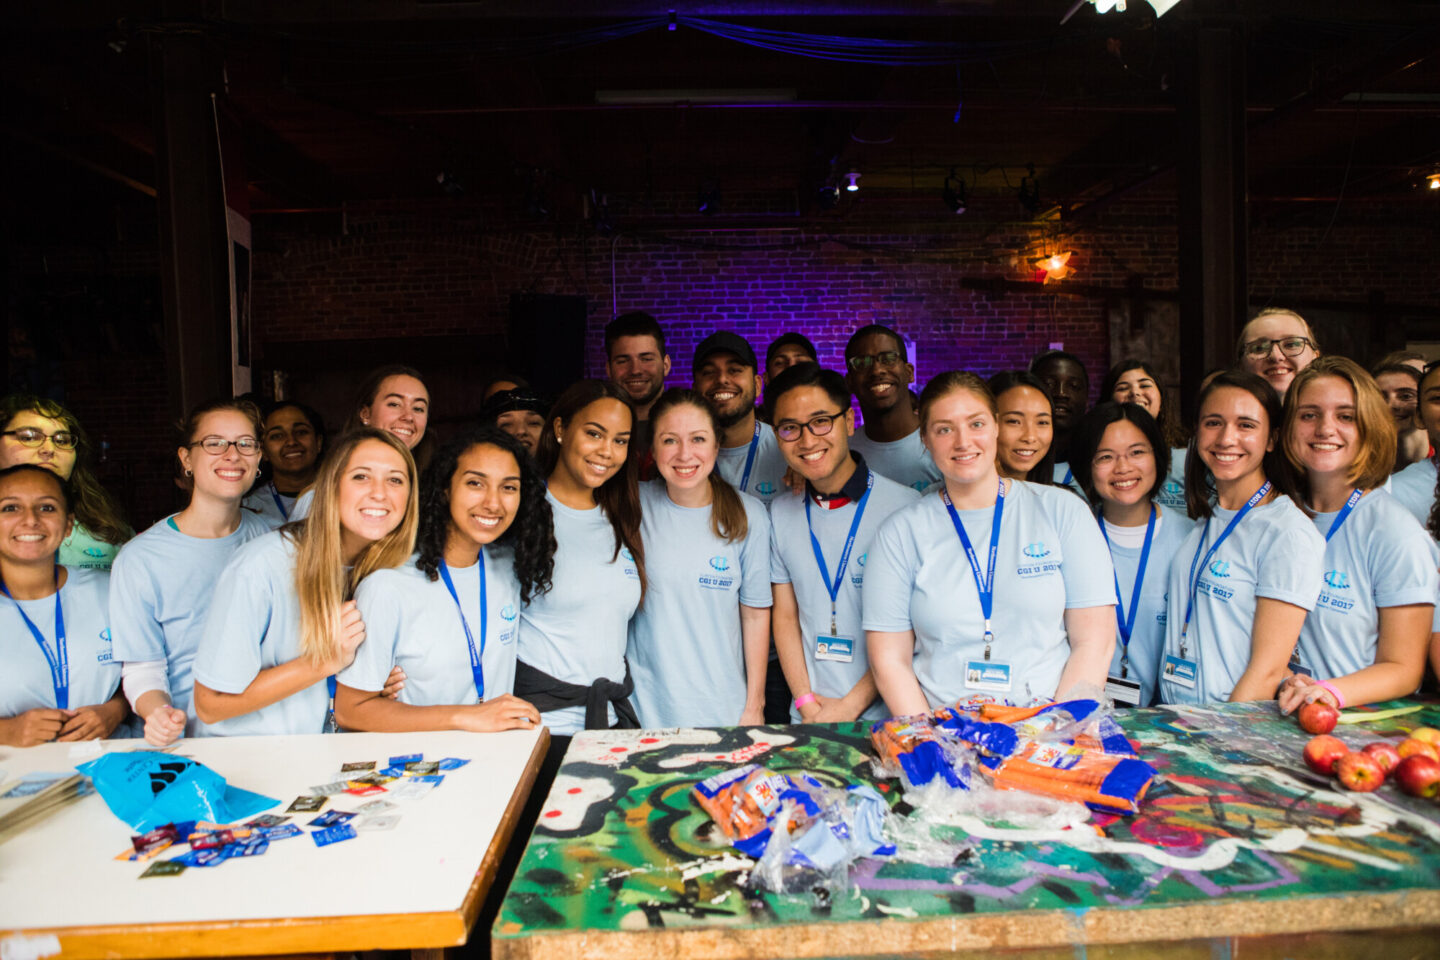 Chelsea Clinton with a large group of volunteers during a CGI U event